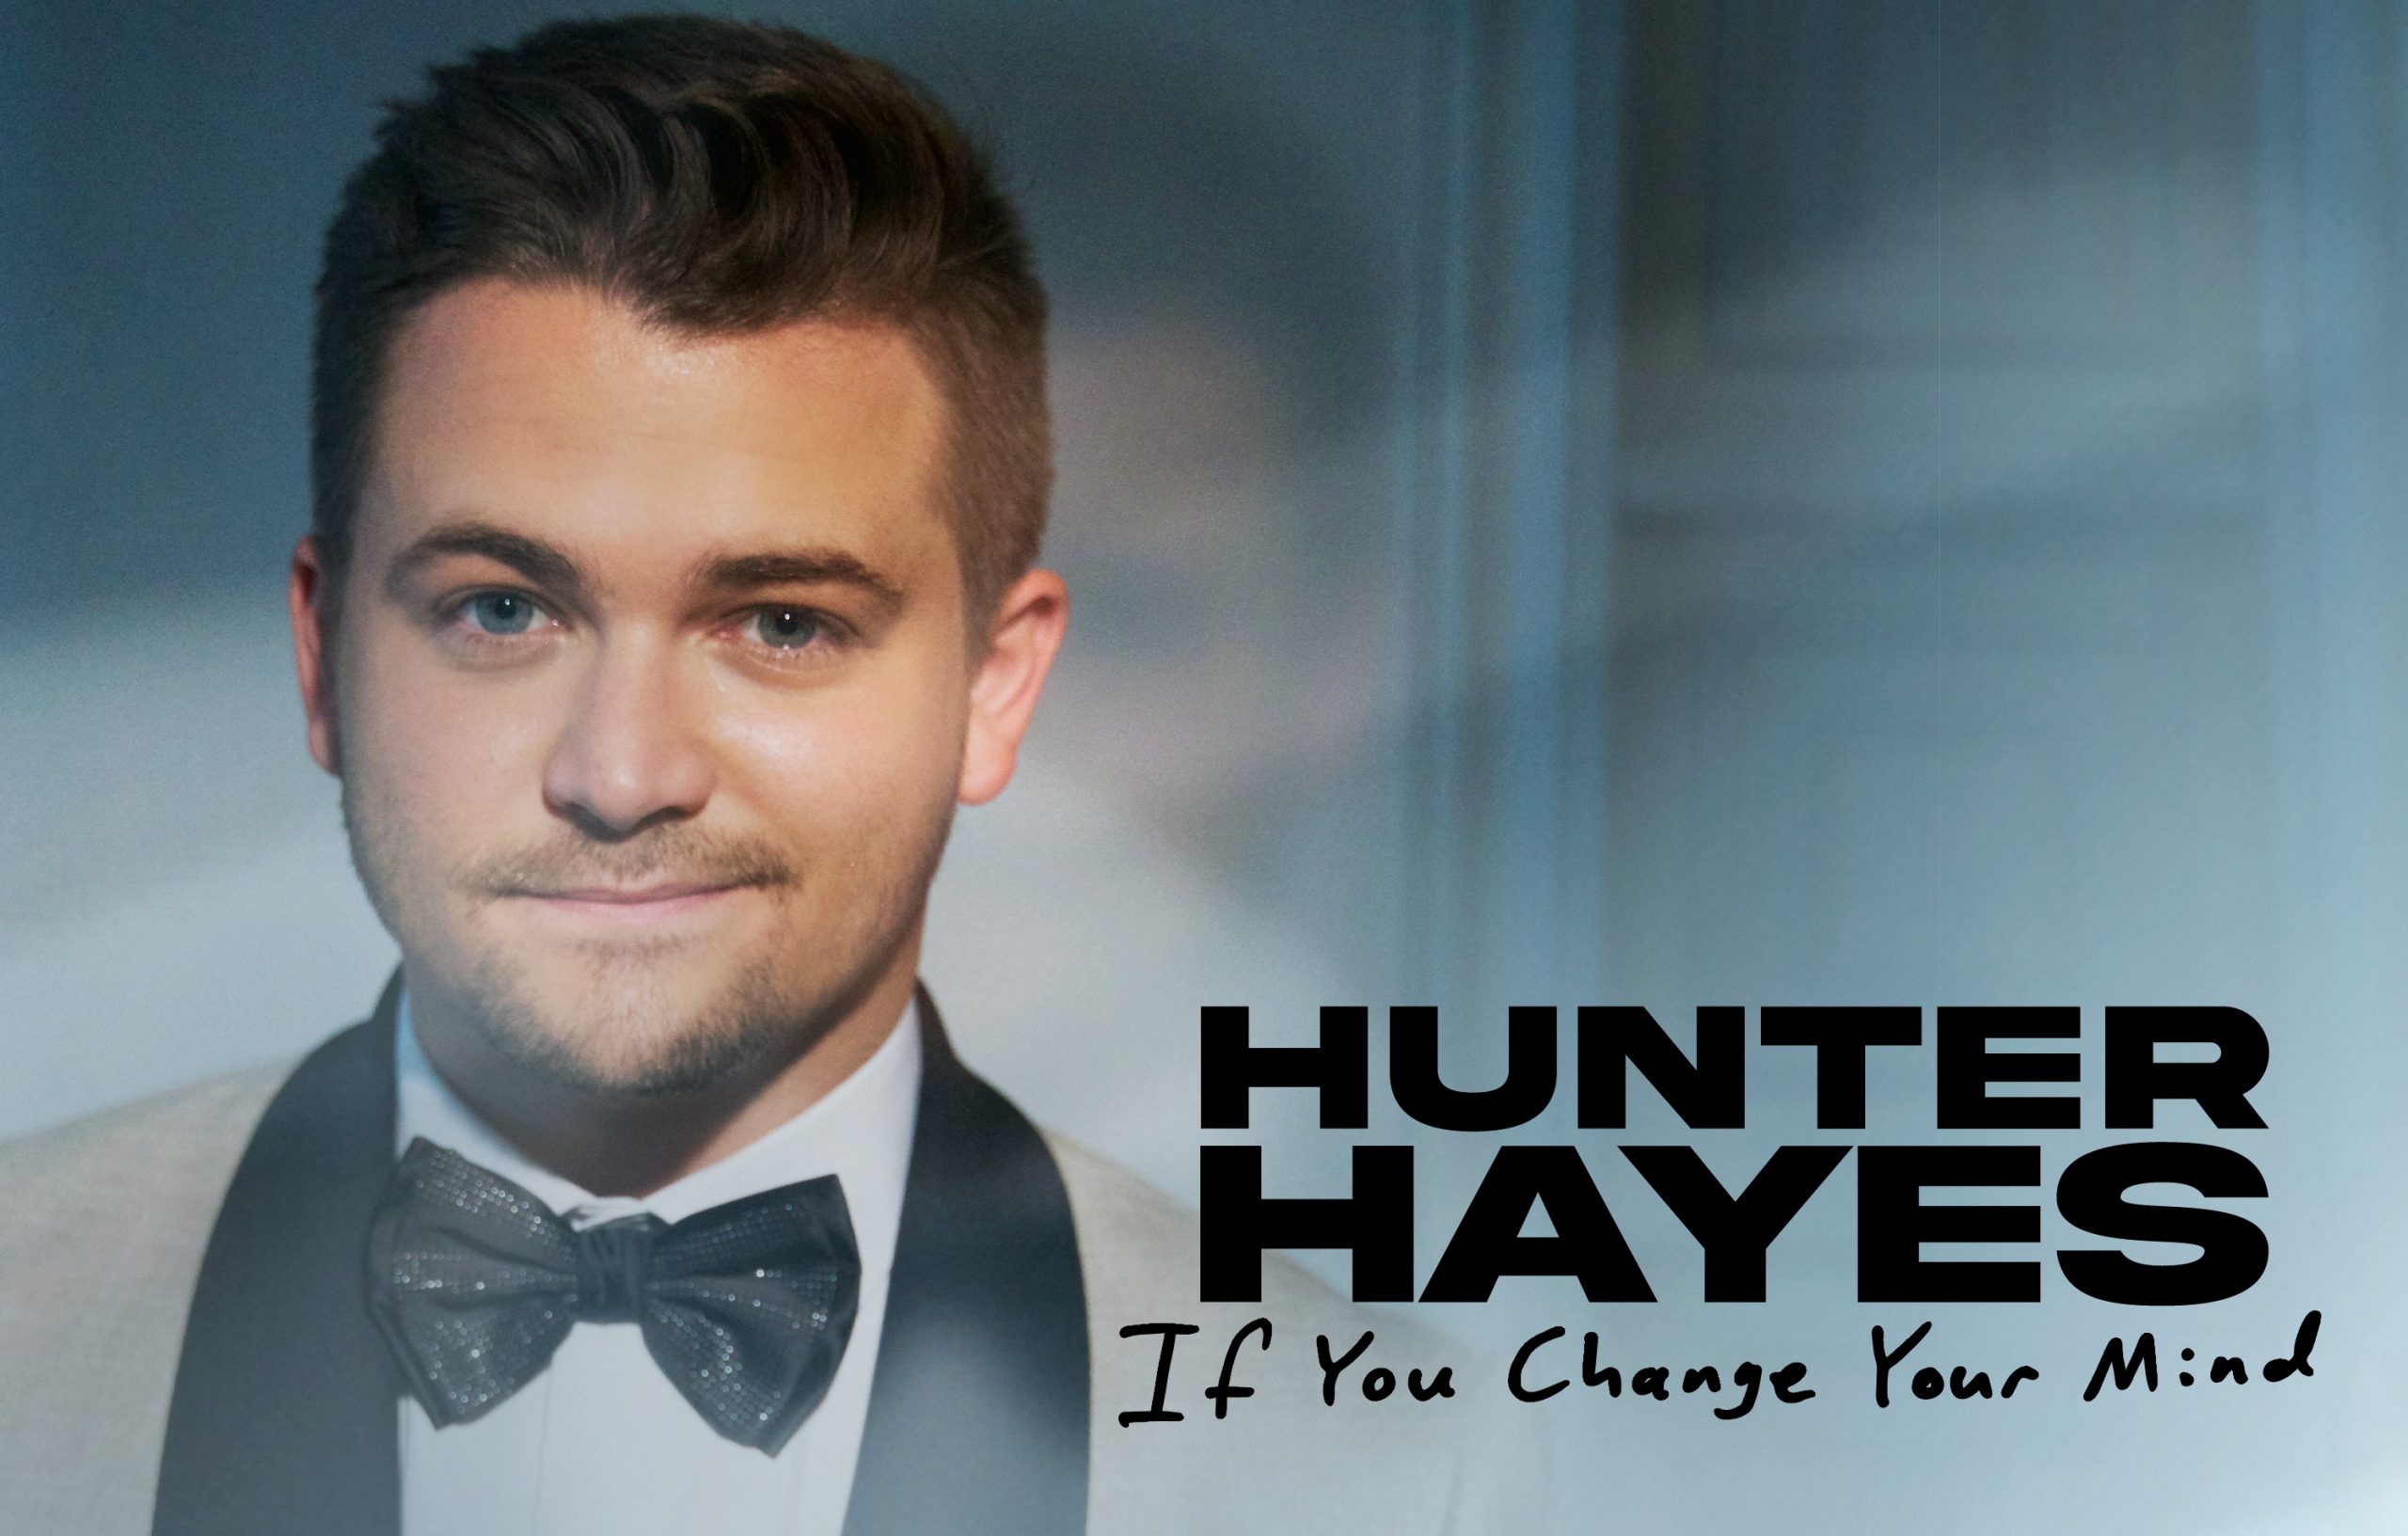 Hunter Hayes A 1615913034 Scaled 